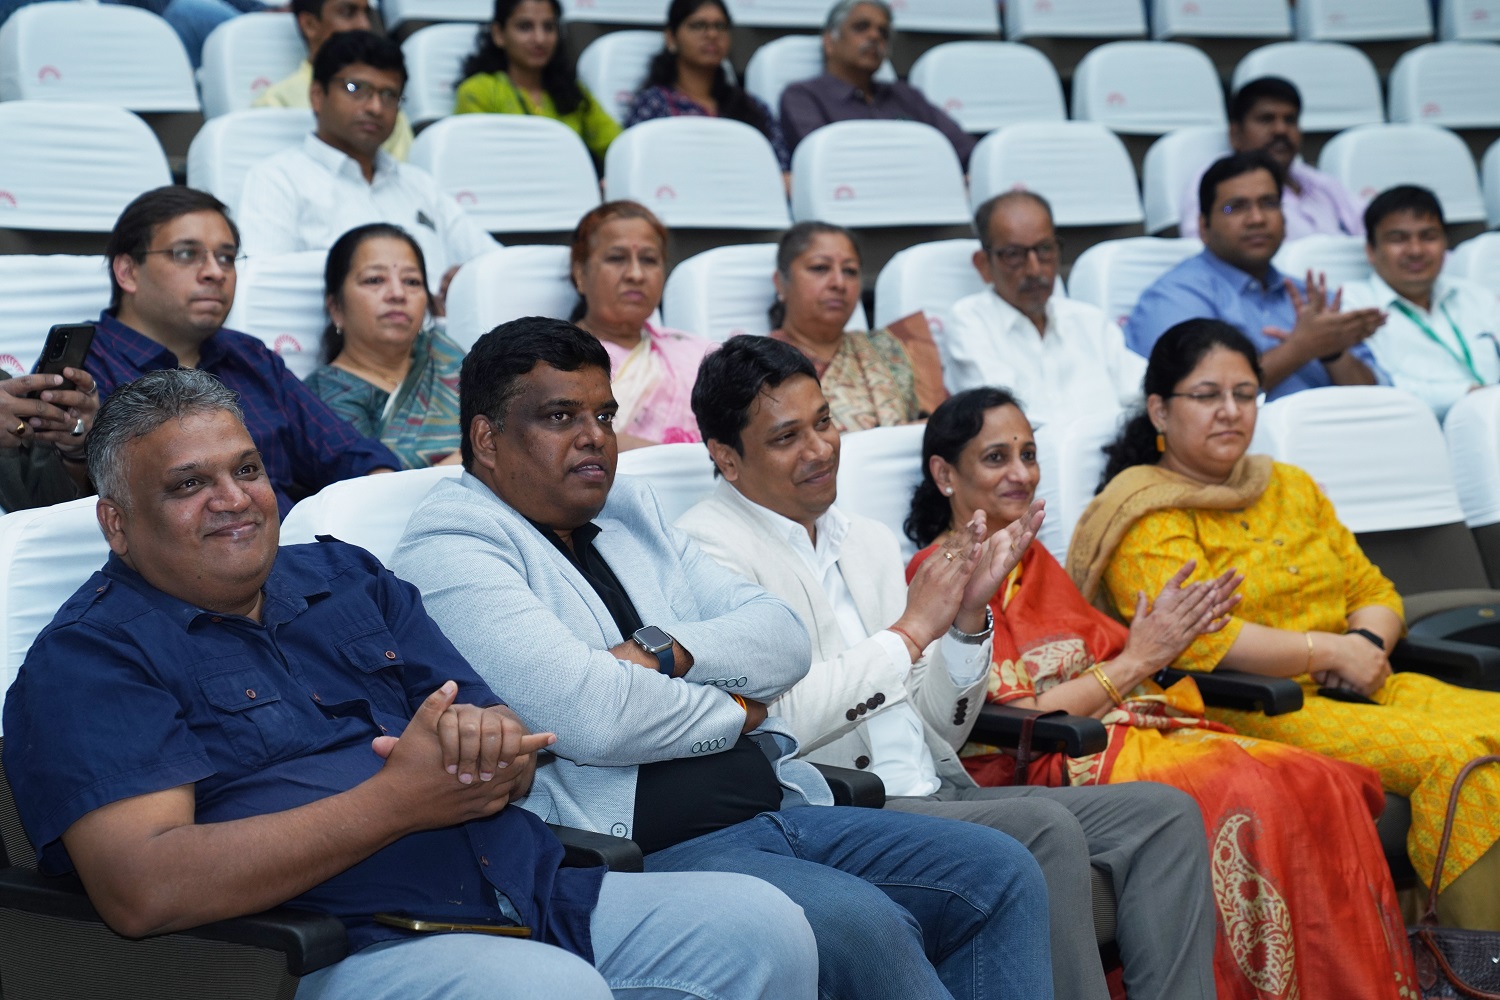 A section of the audience at the summit.